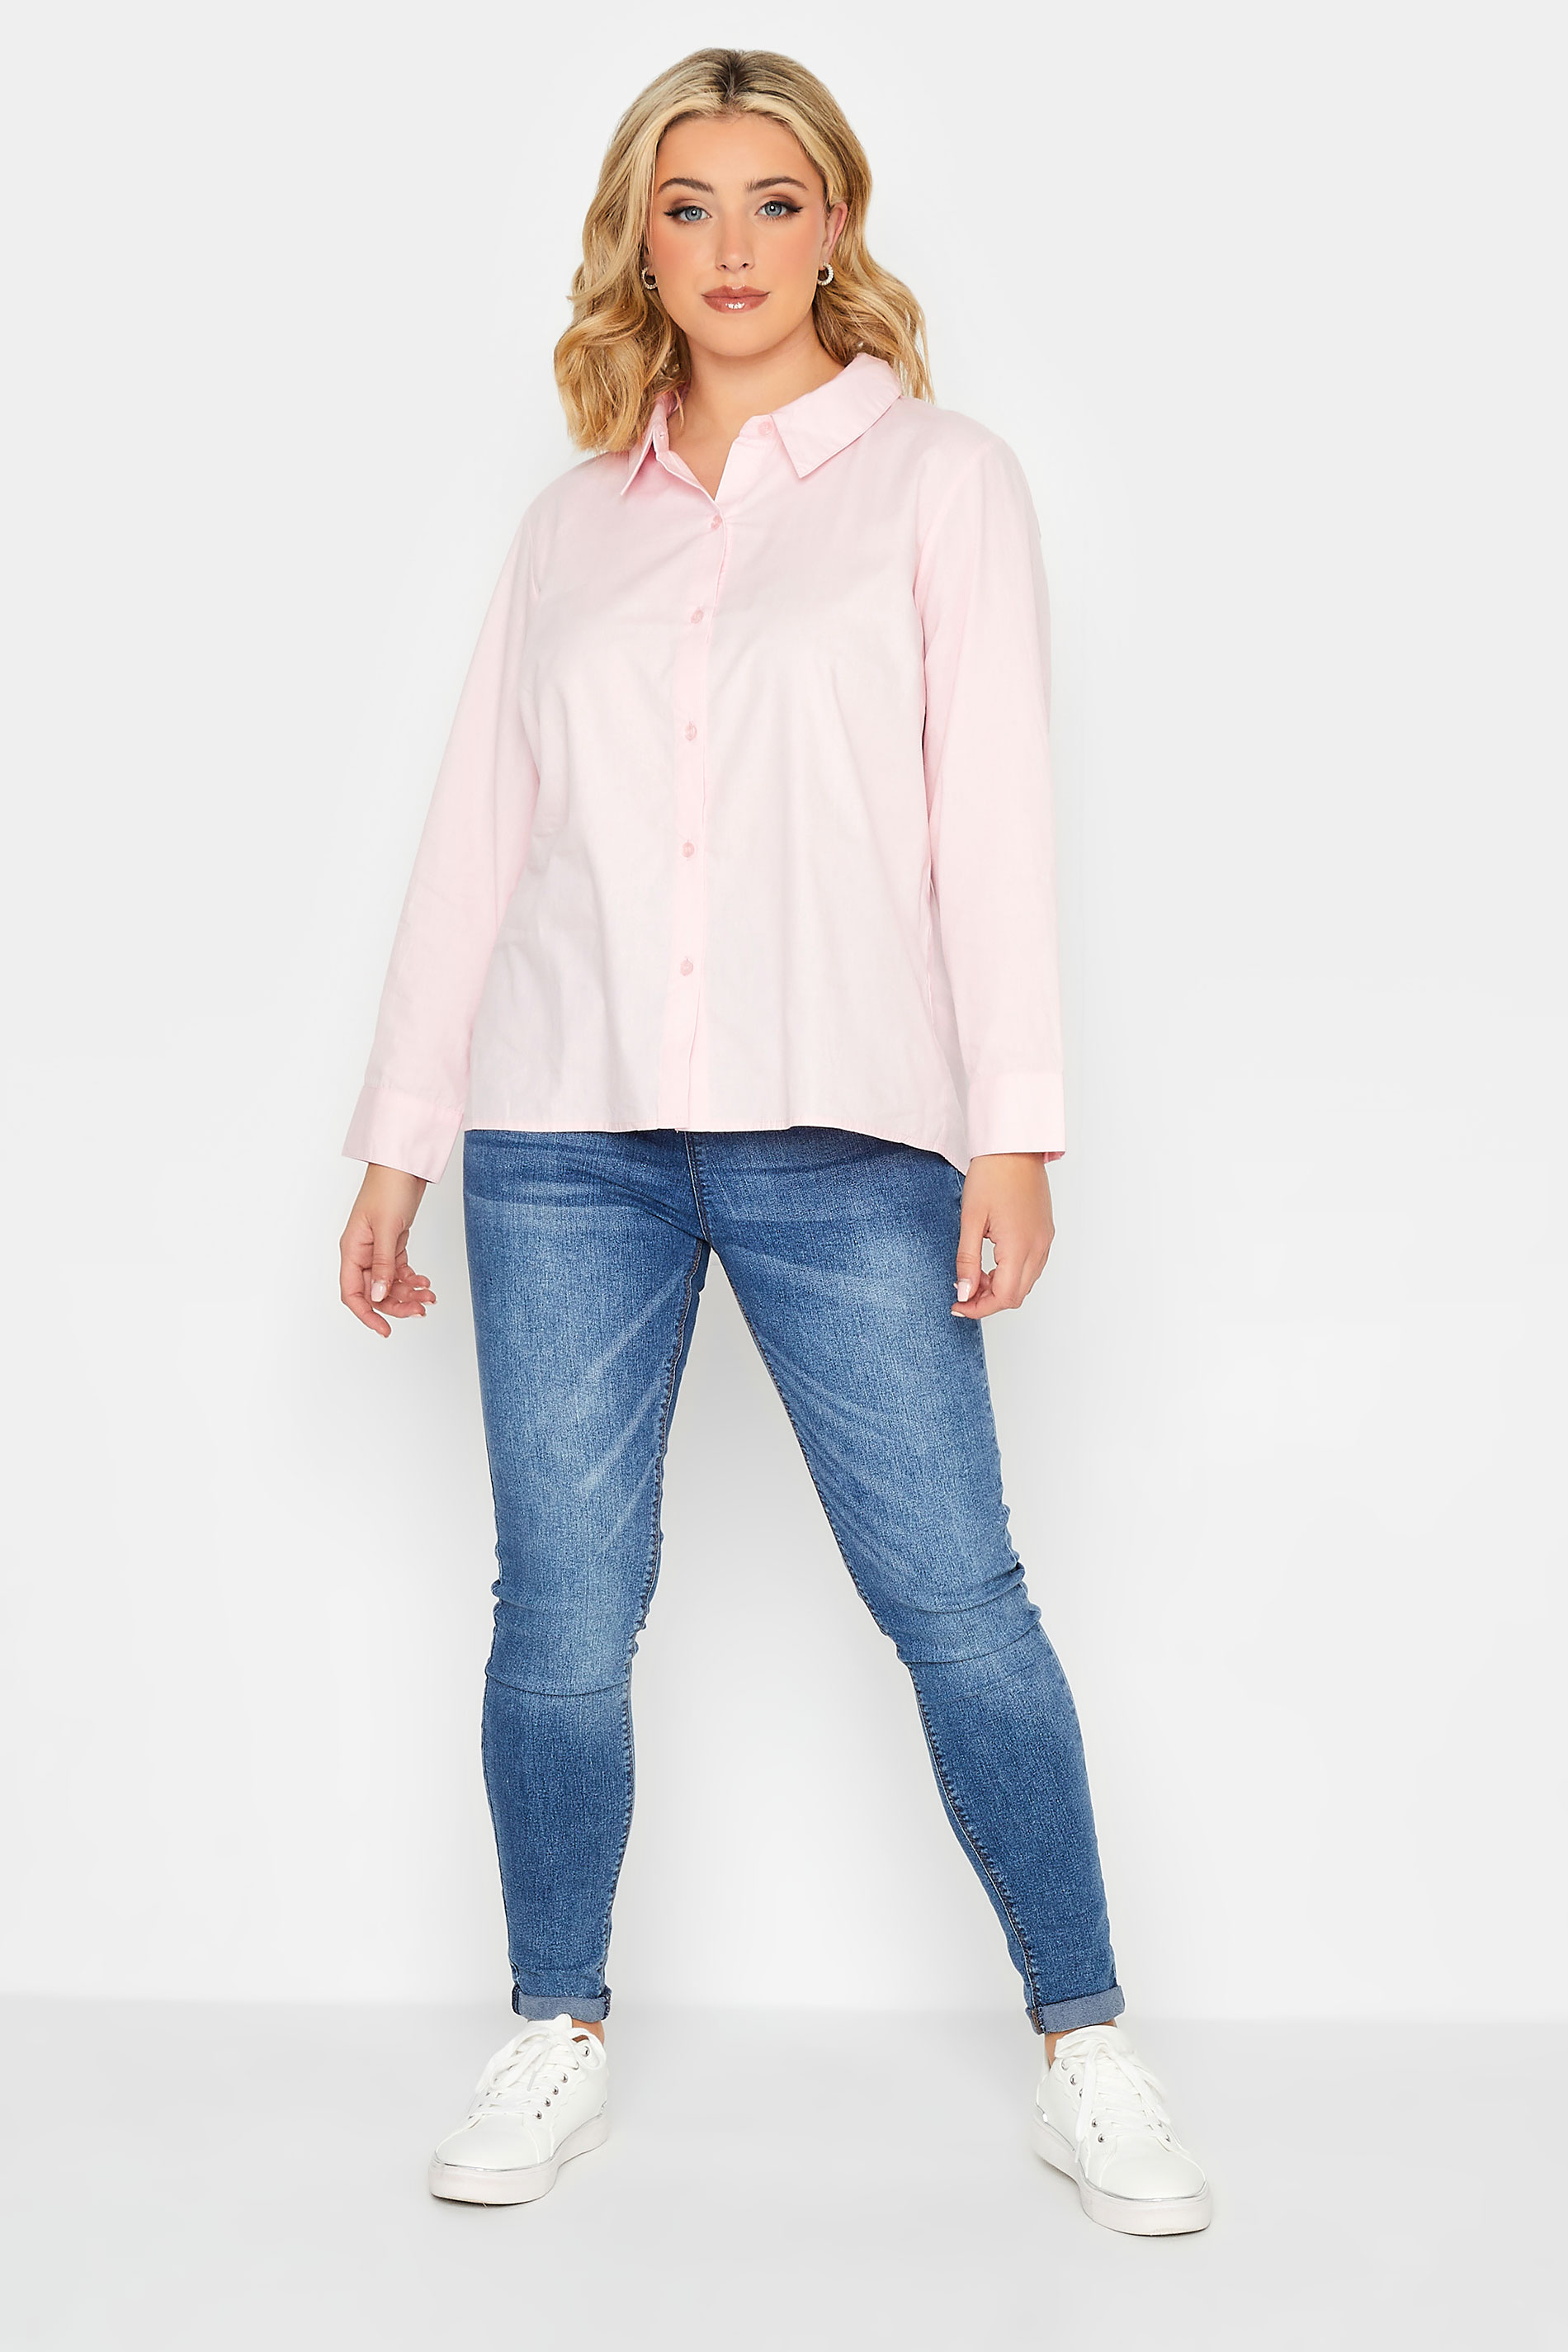 YOURS PETITE Plus Size Pink Fitted Cotton Shirt | Yours Clothing 2